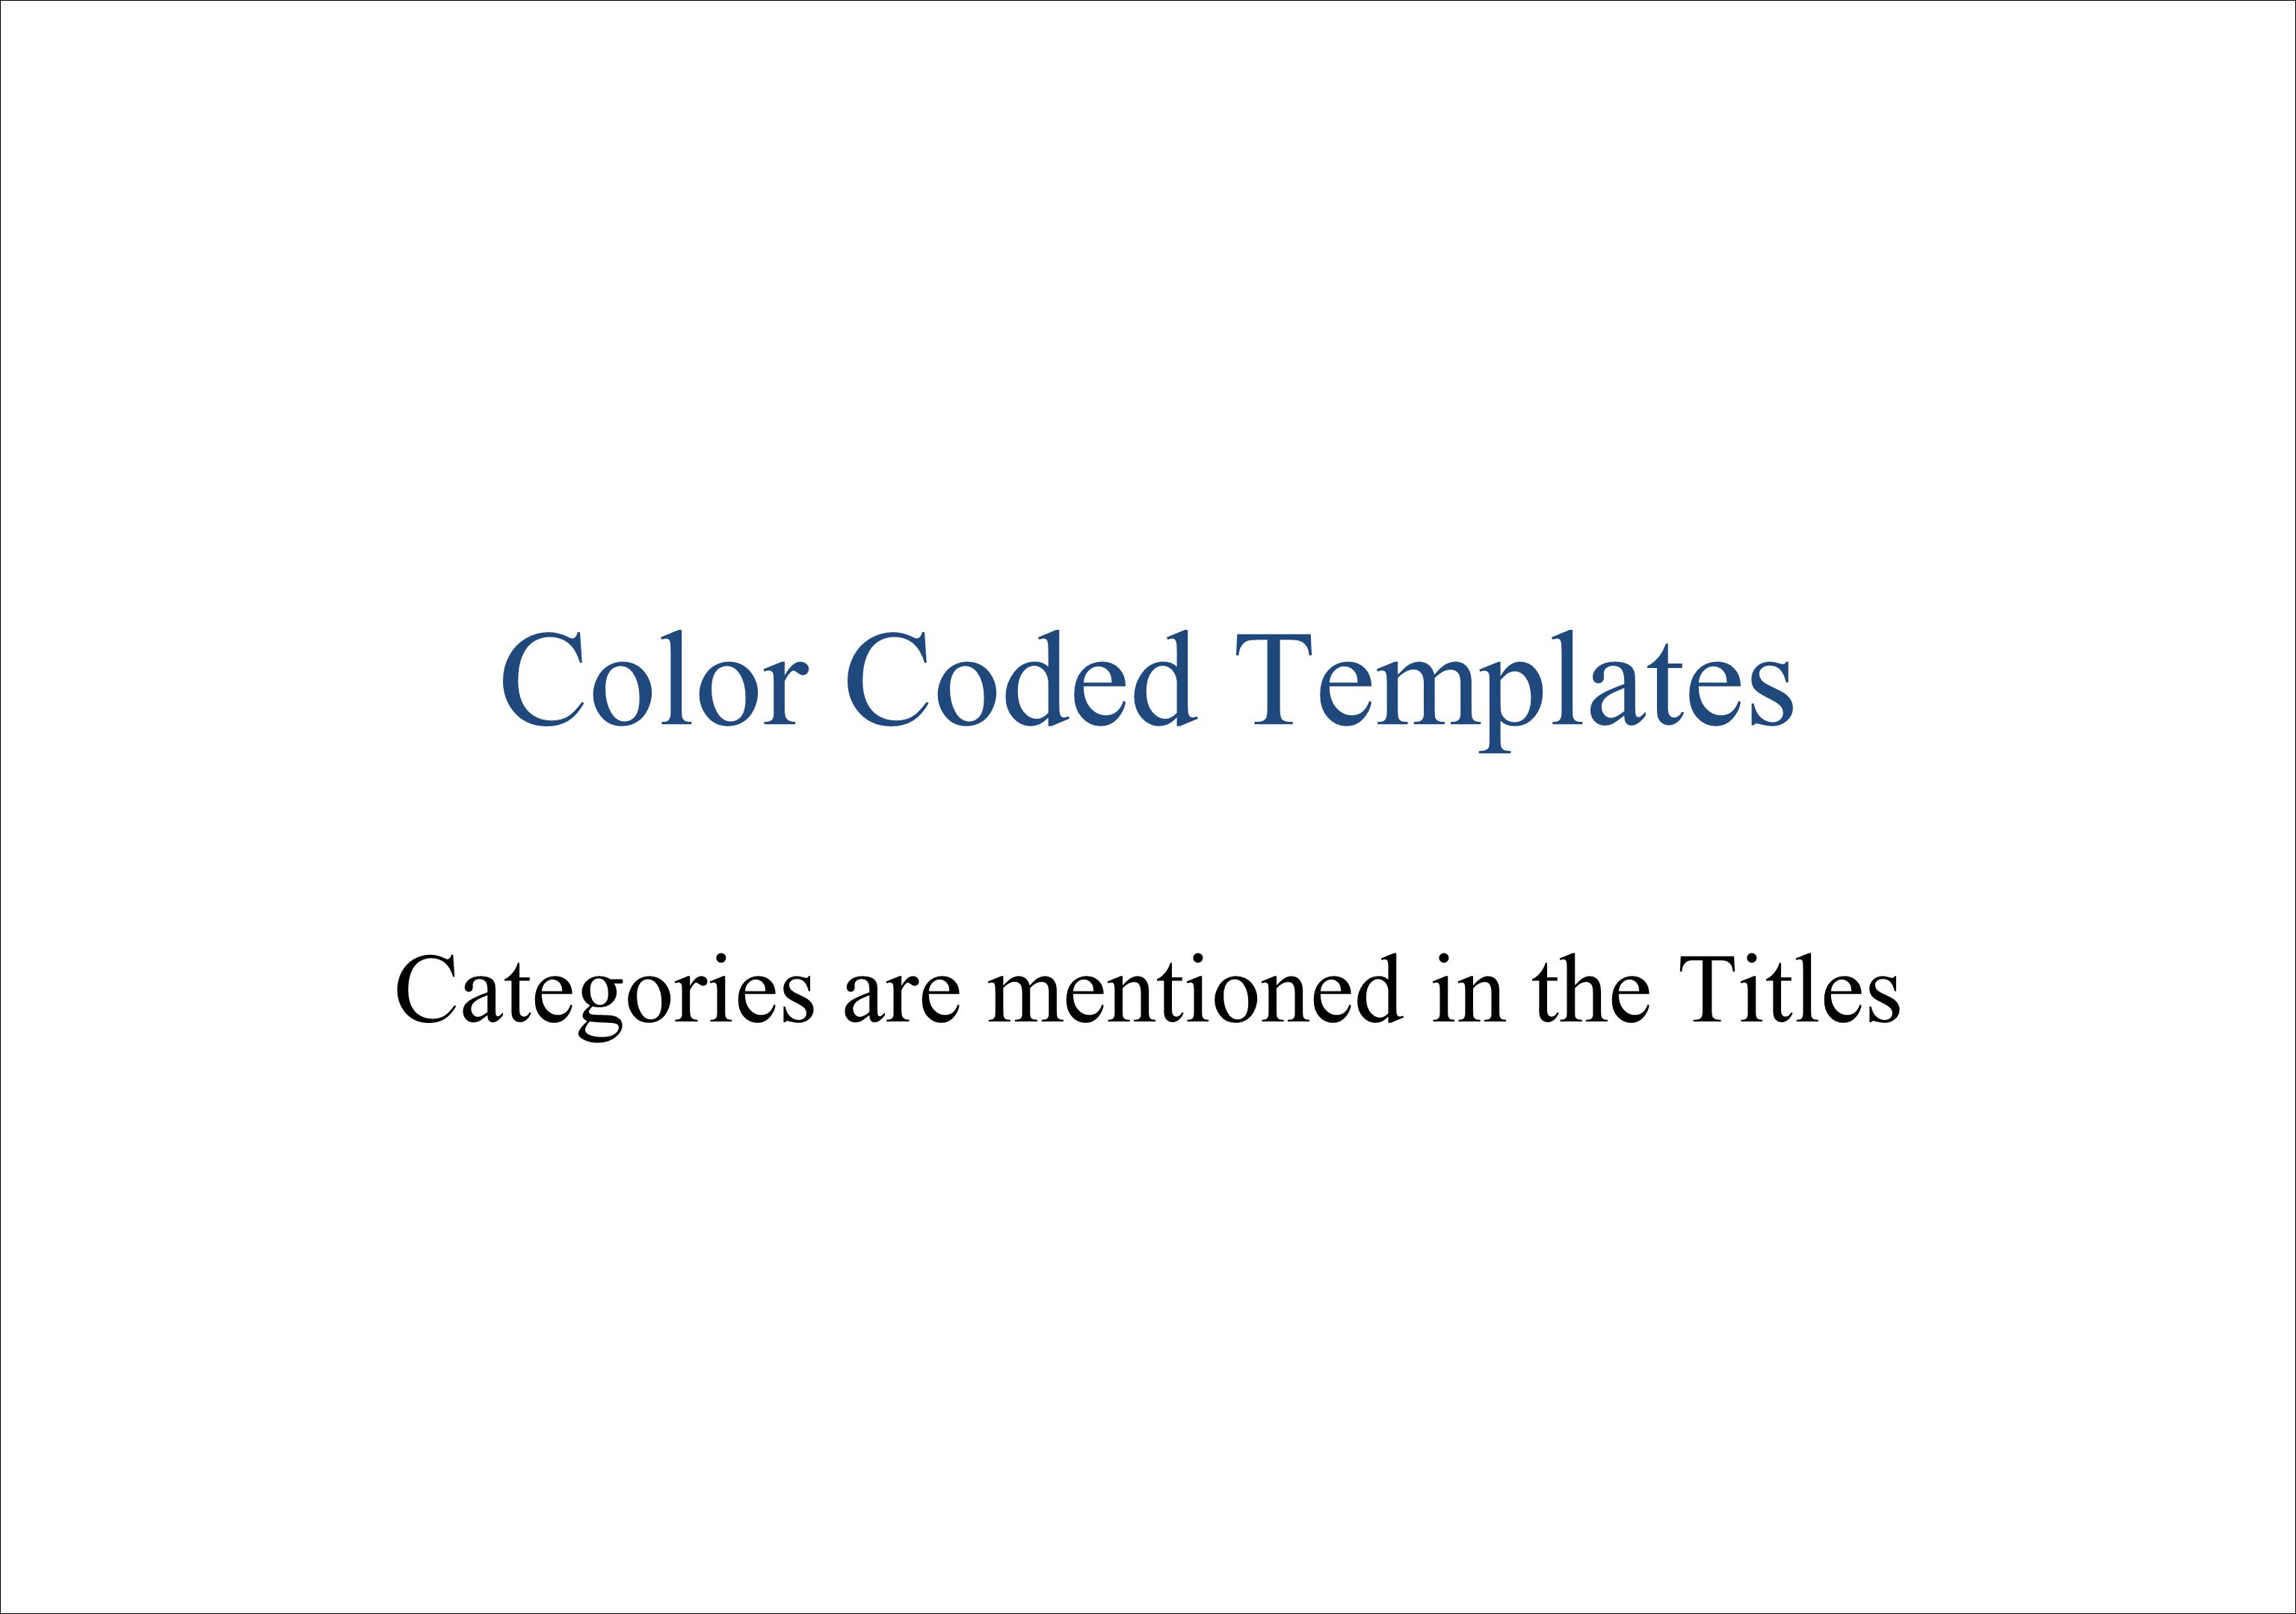 Color Coded Templates Categories are mentioned in the Titles